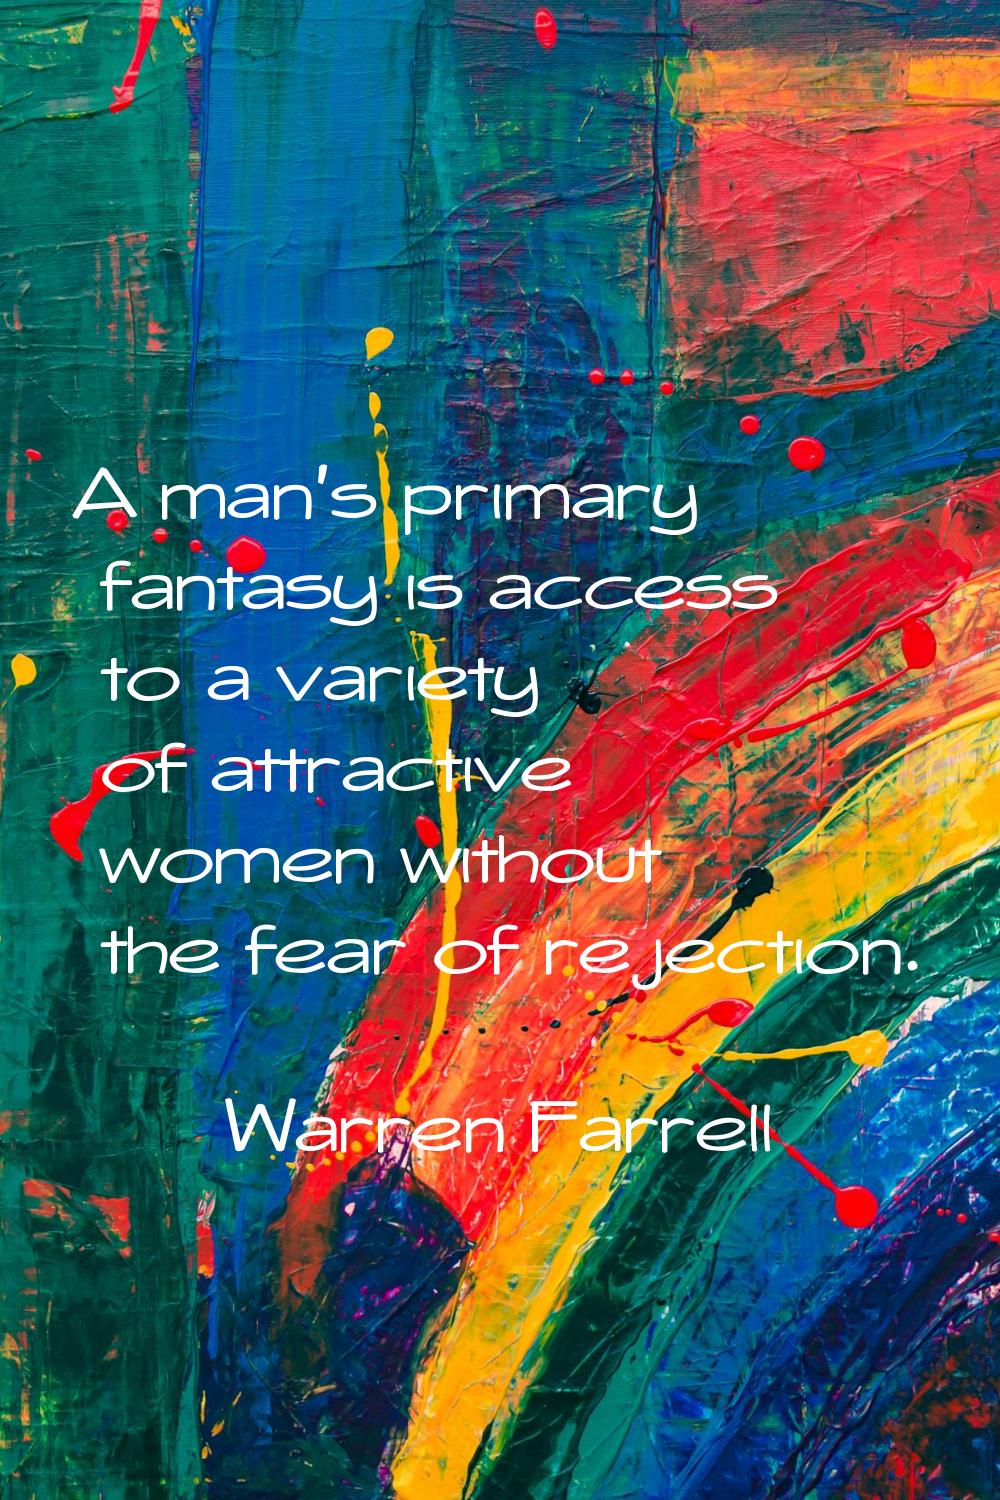 A man's primary fantasy is access to a variety of attractive women without the fear of rejection.